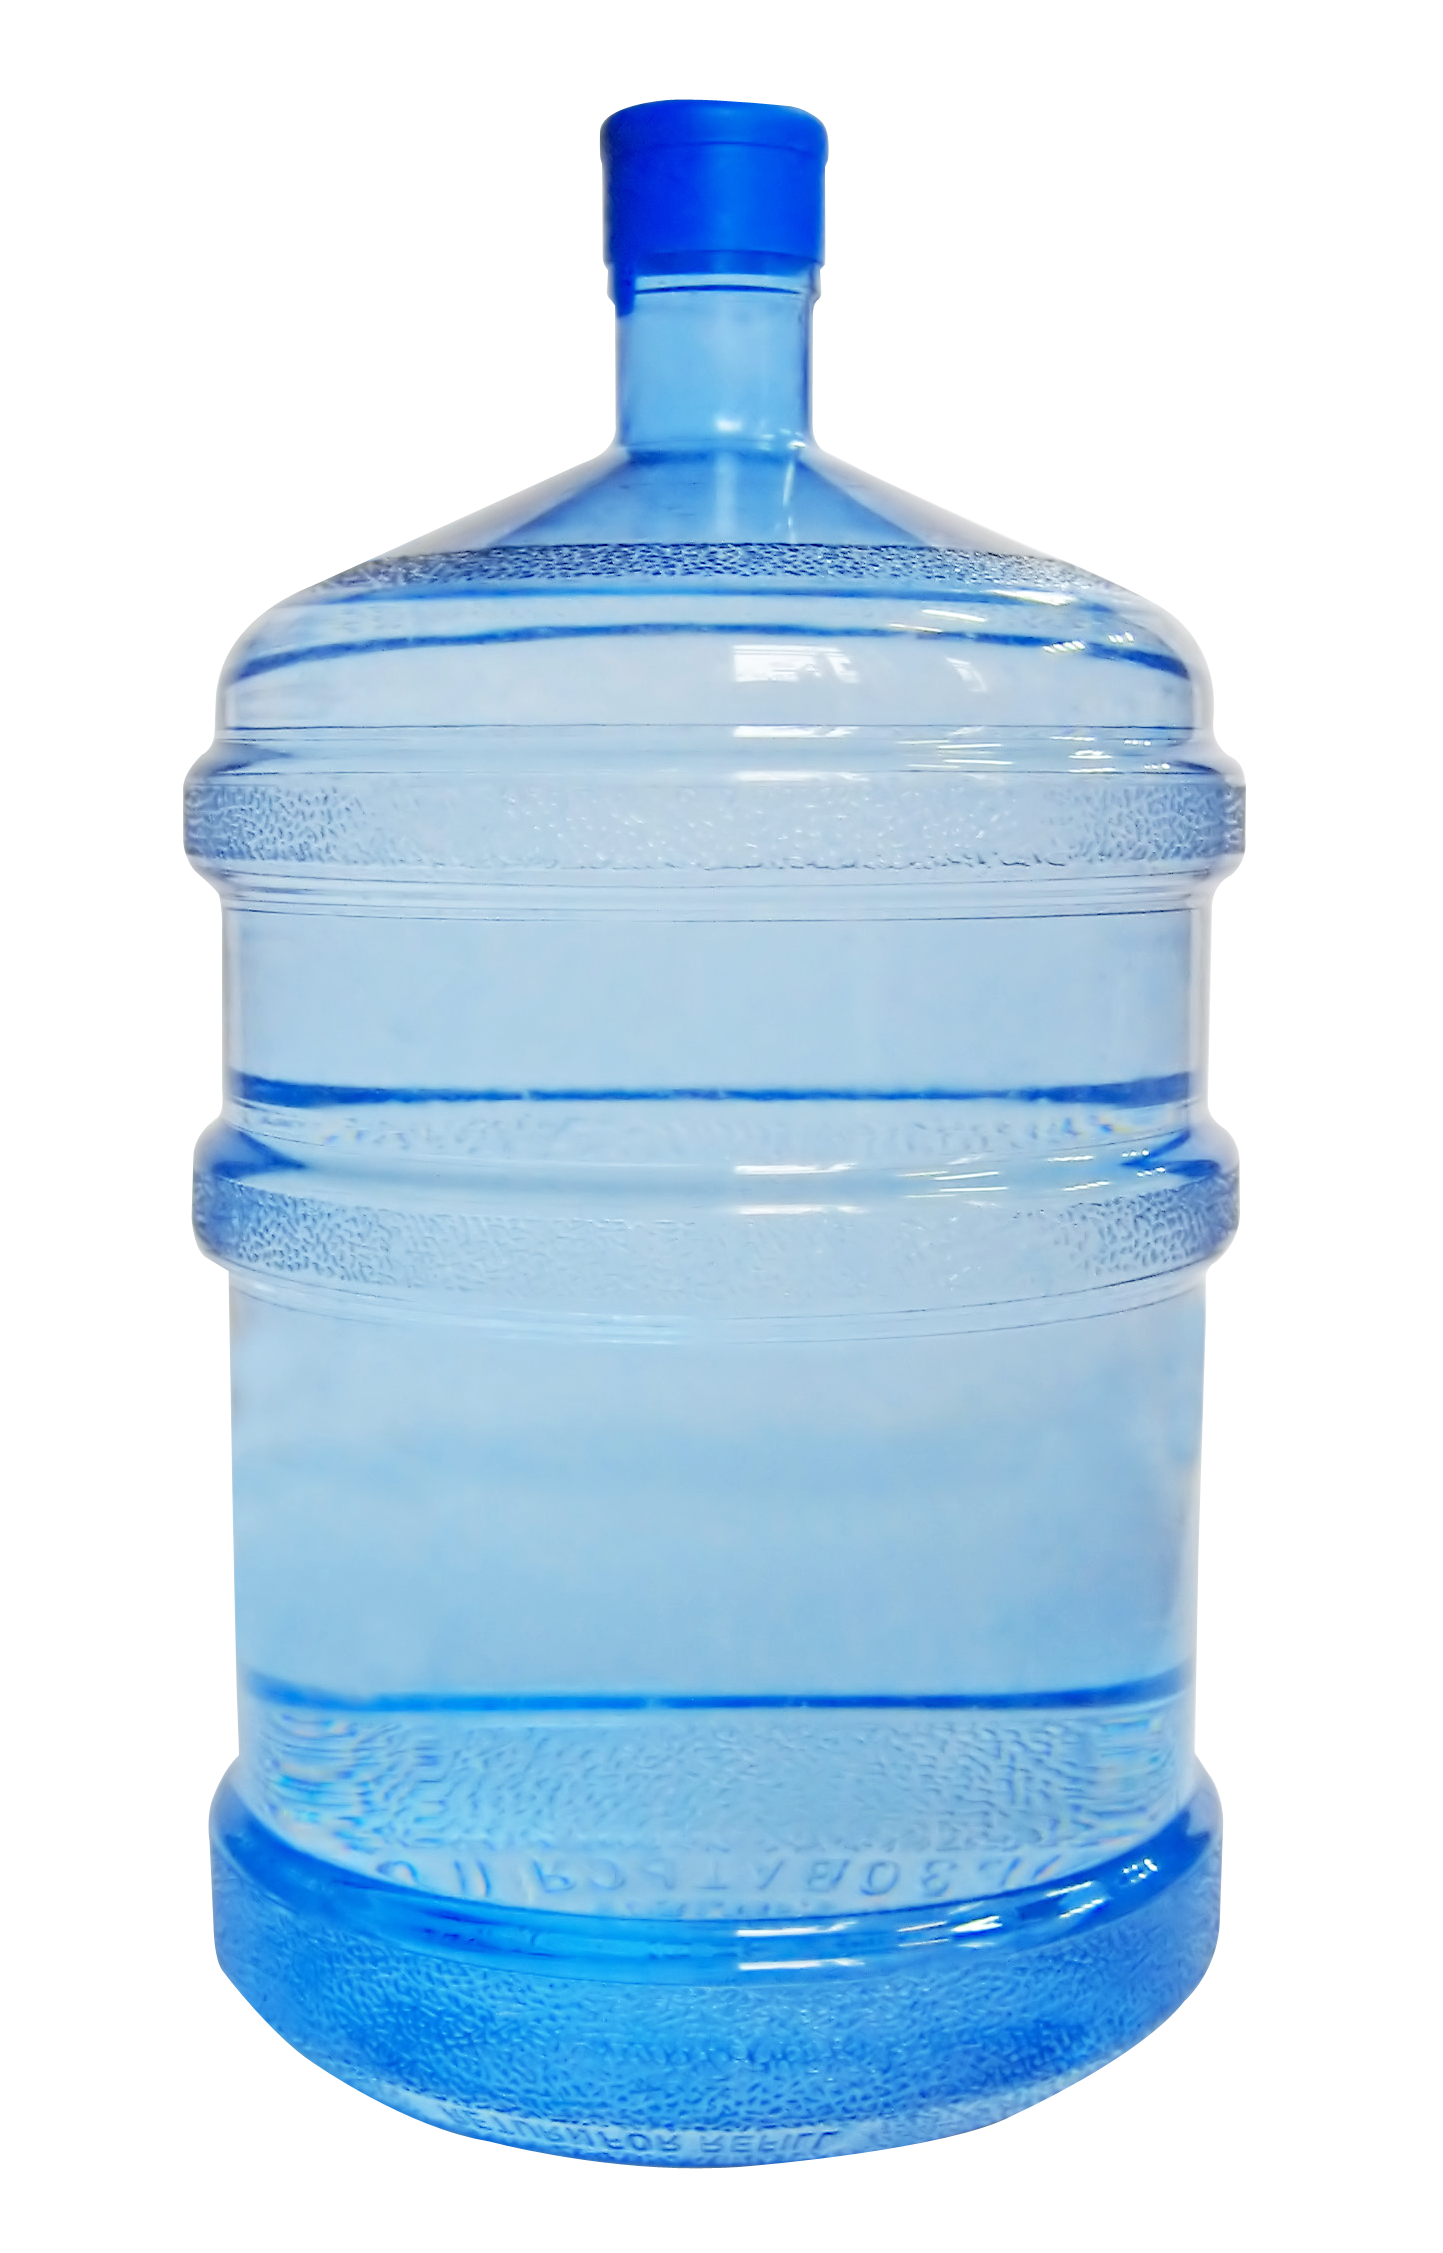 Water bottle PNG image transparent image download, size: 400x400px